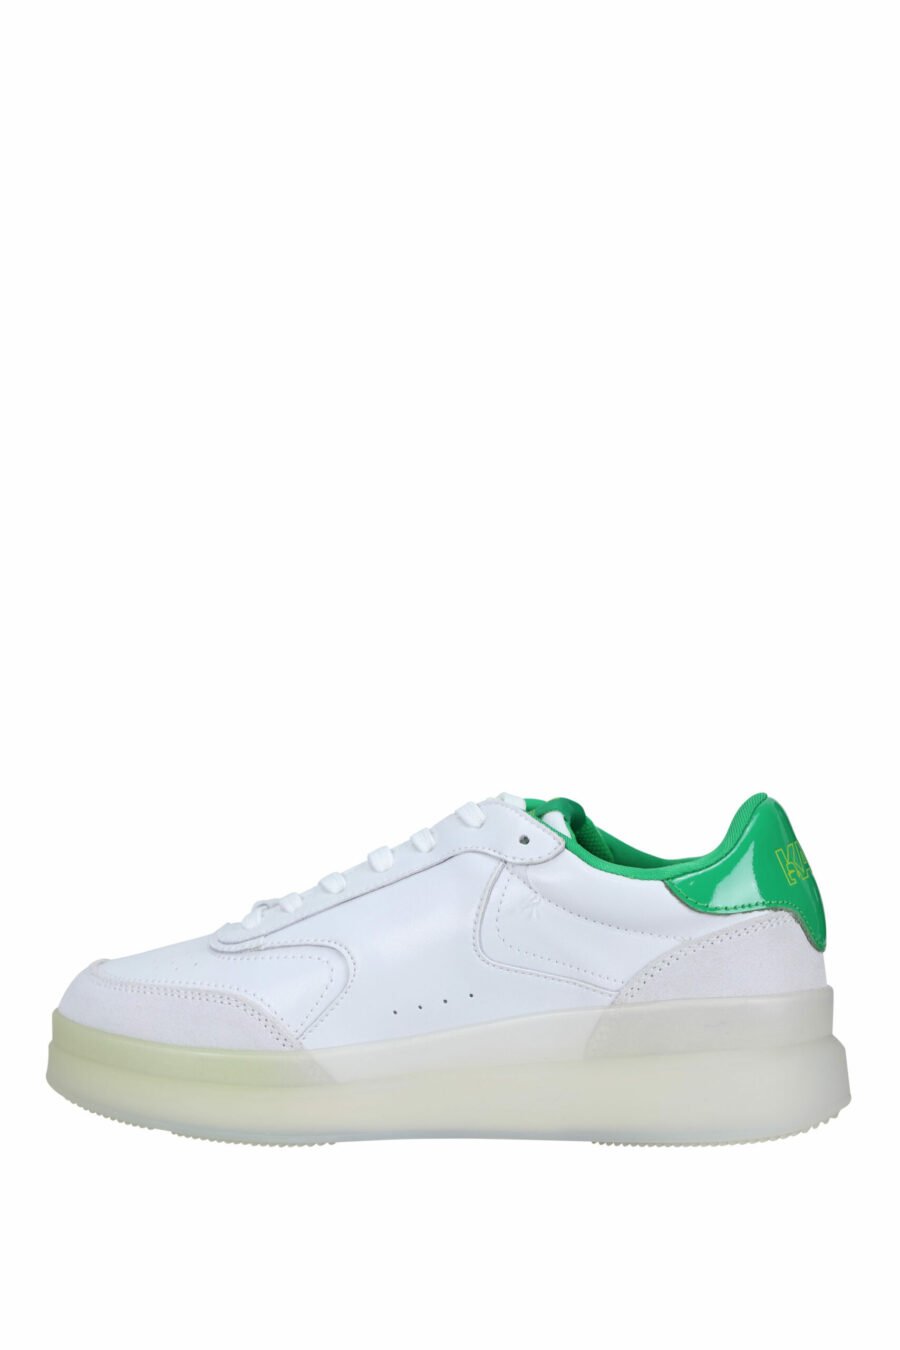 White and grey "brink" trainers with green details - 5059529294495 2 scaled